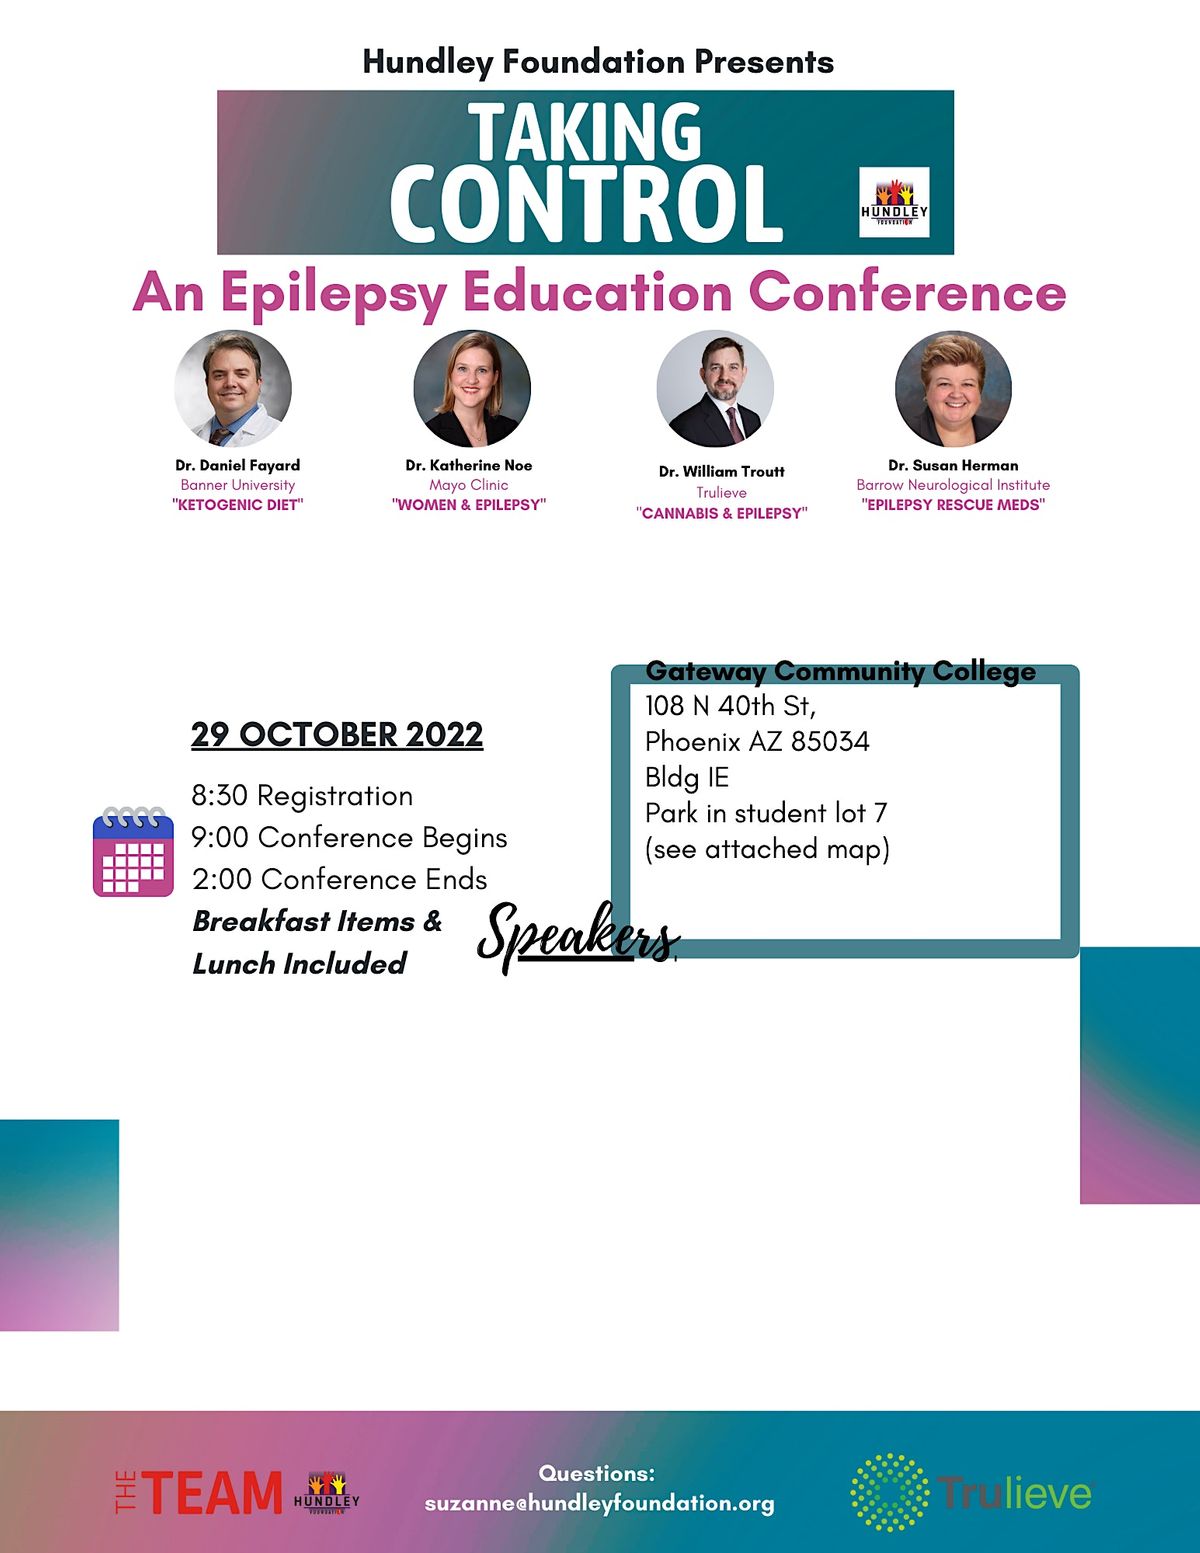 TAKING CONTROL - An Epilepsy Education Conference